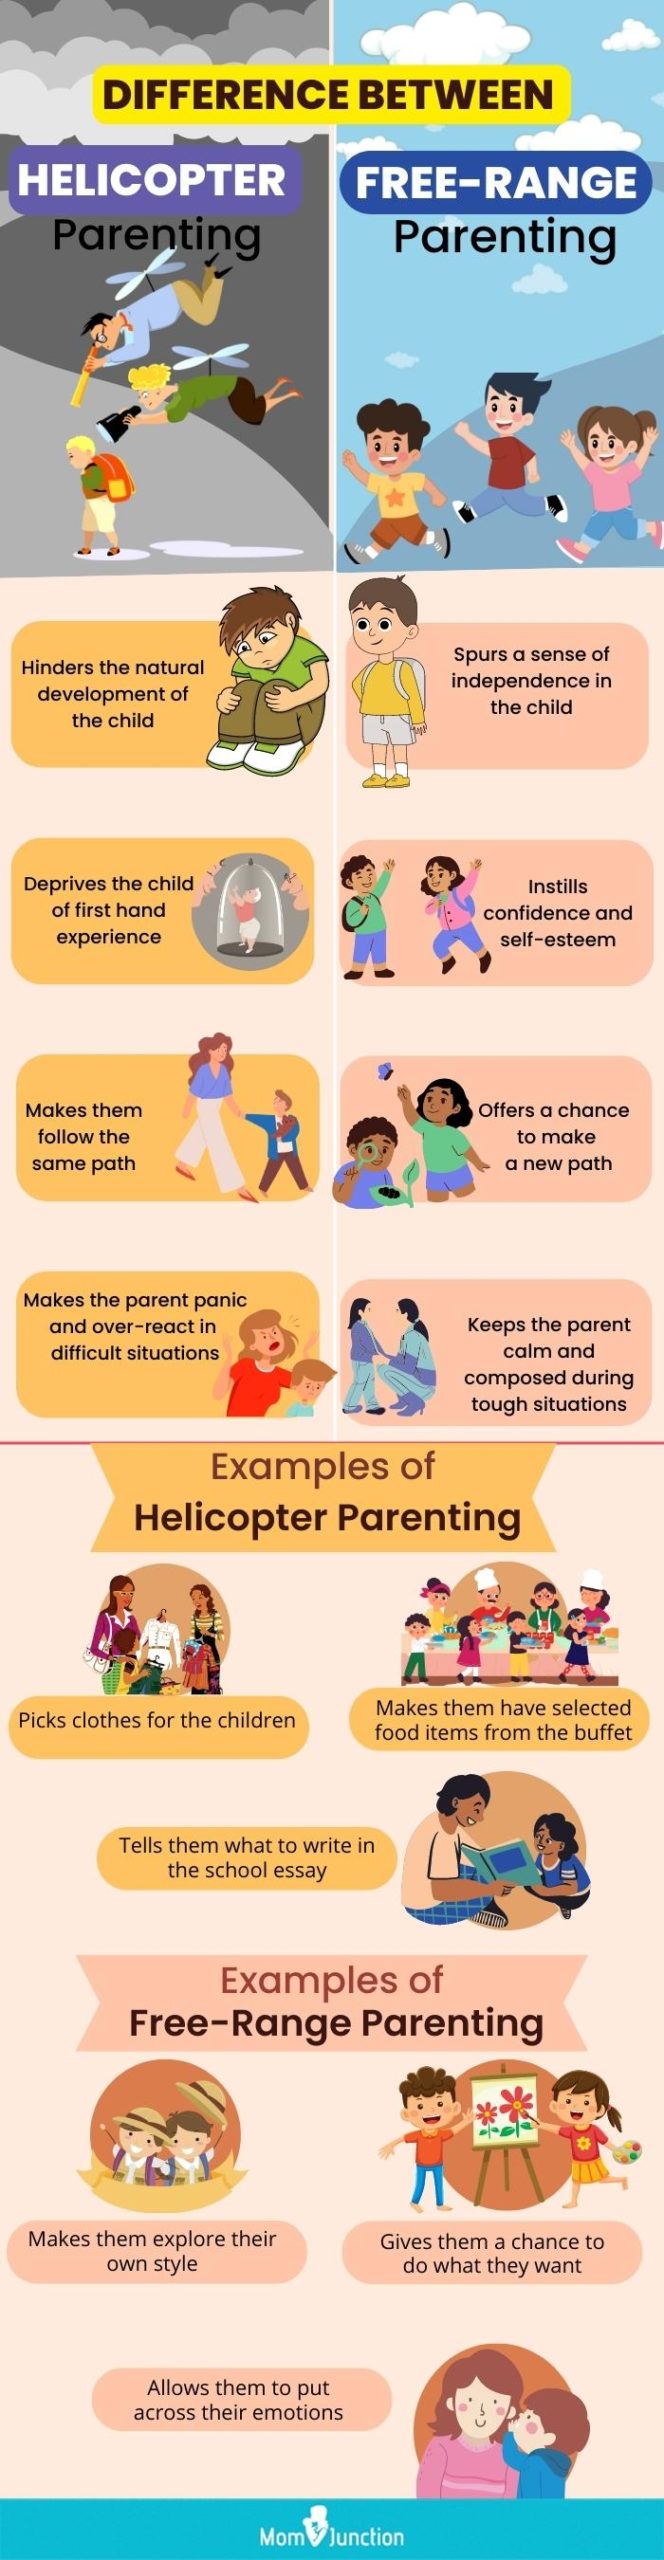 8 Vitals Signs Of Helicopter Parenting And Its Effects